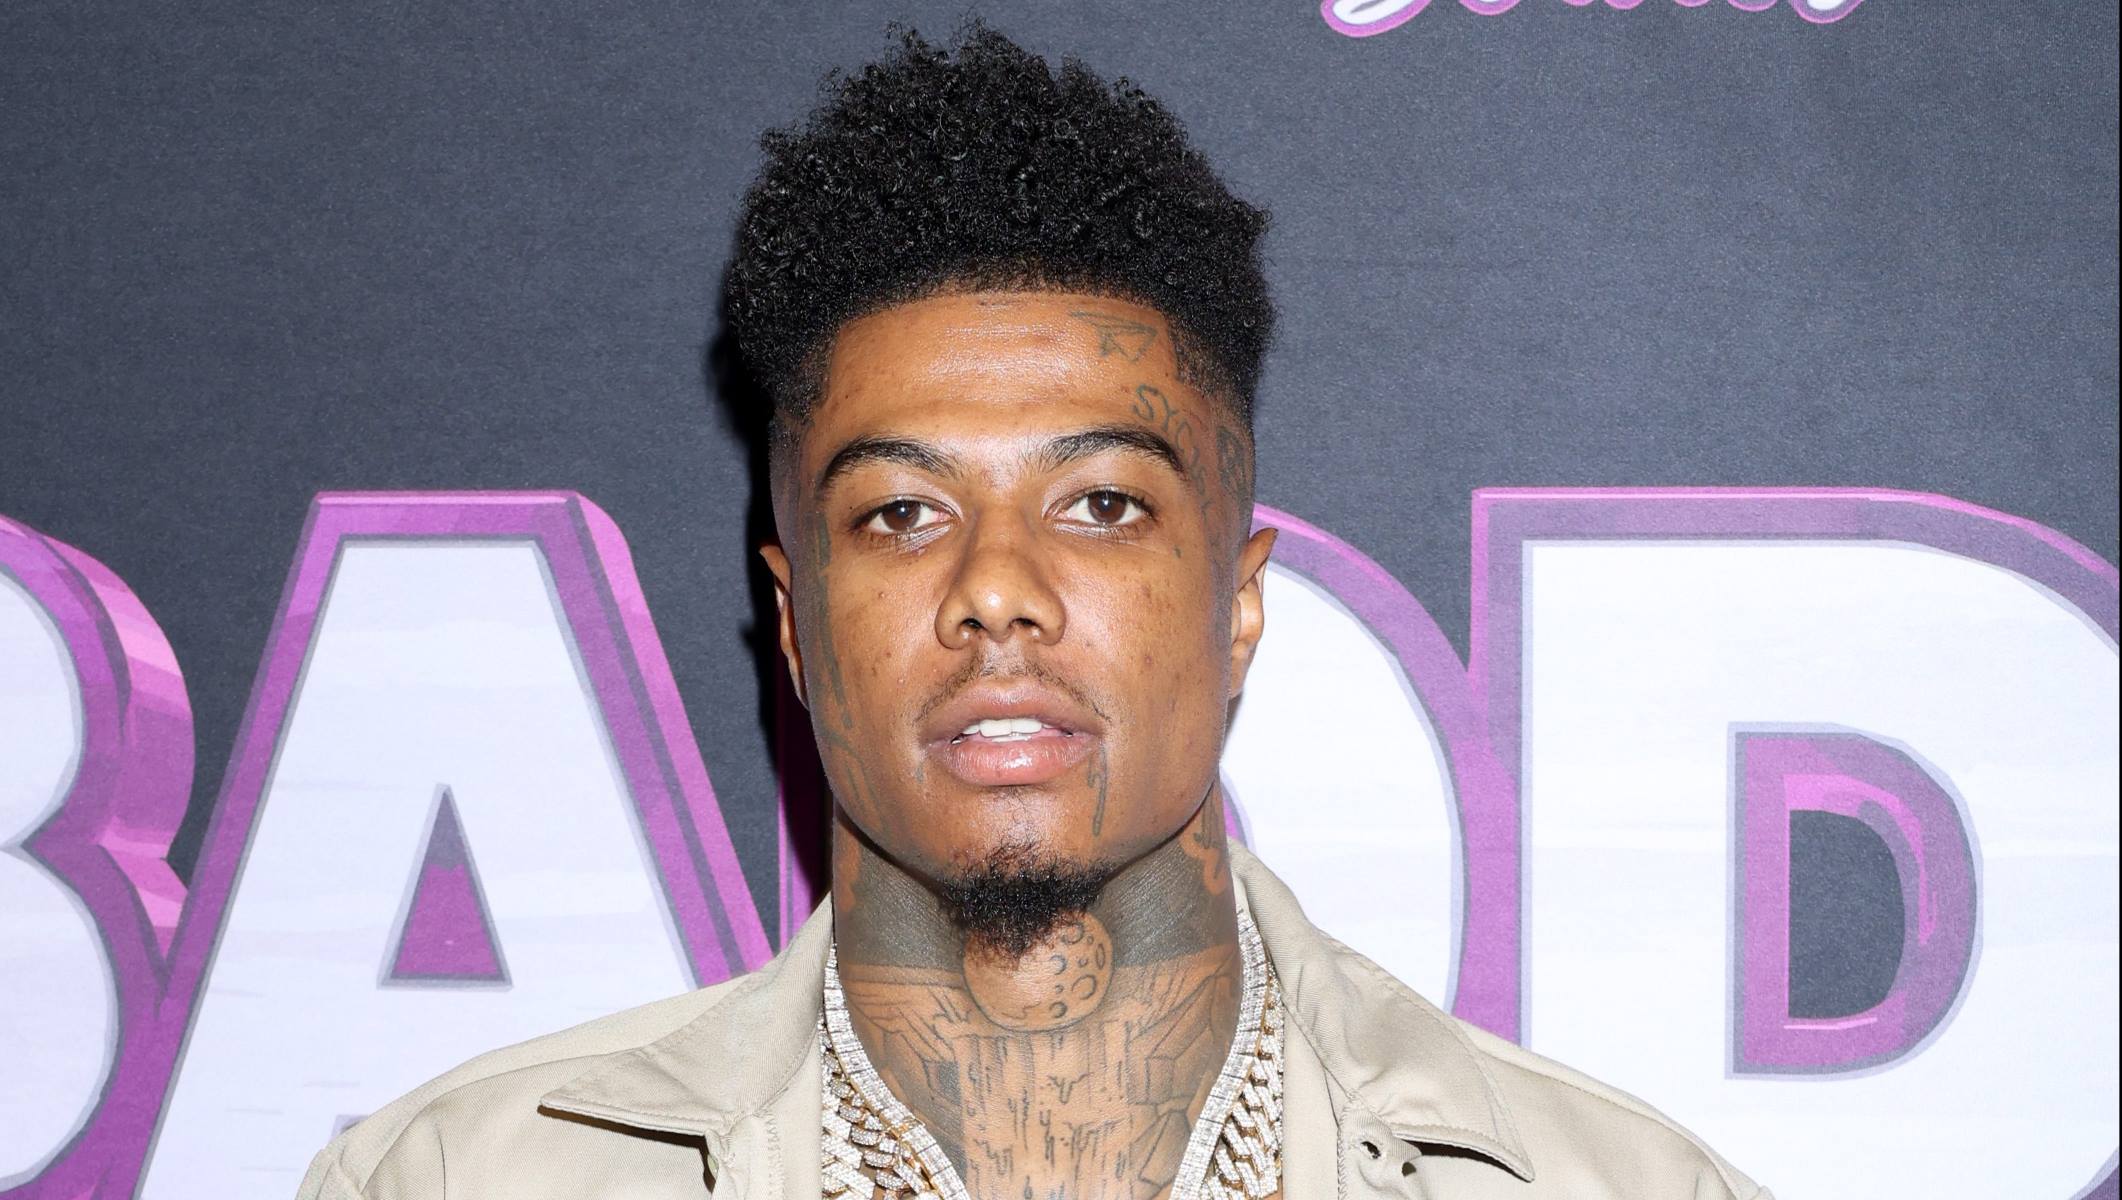 New Diss Track Released By Blueface Sparks Controversy And Drama